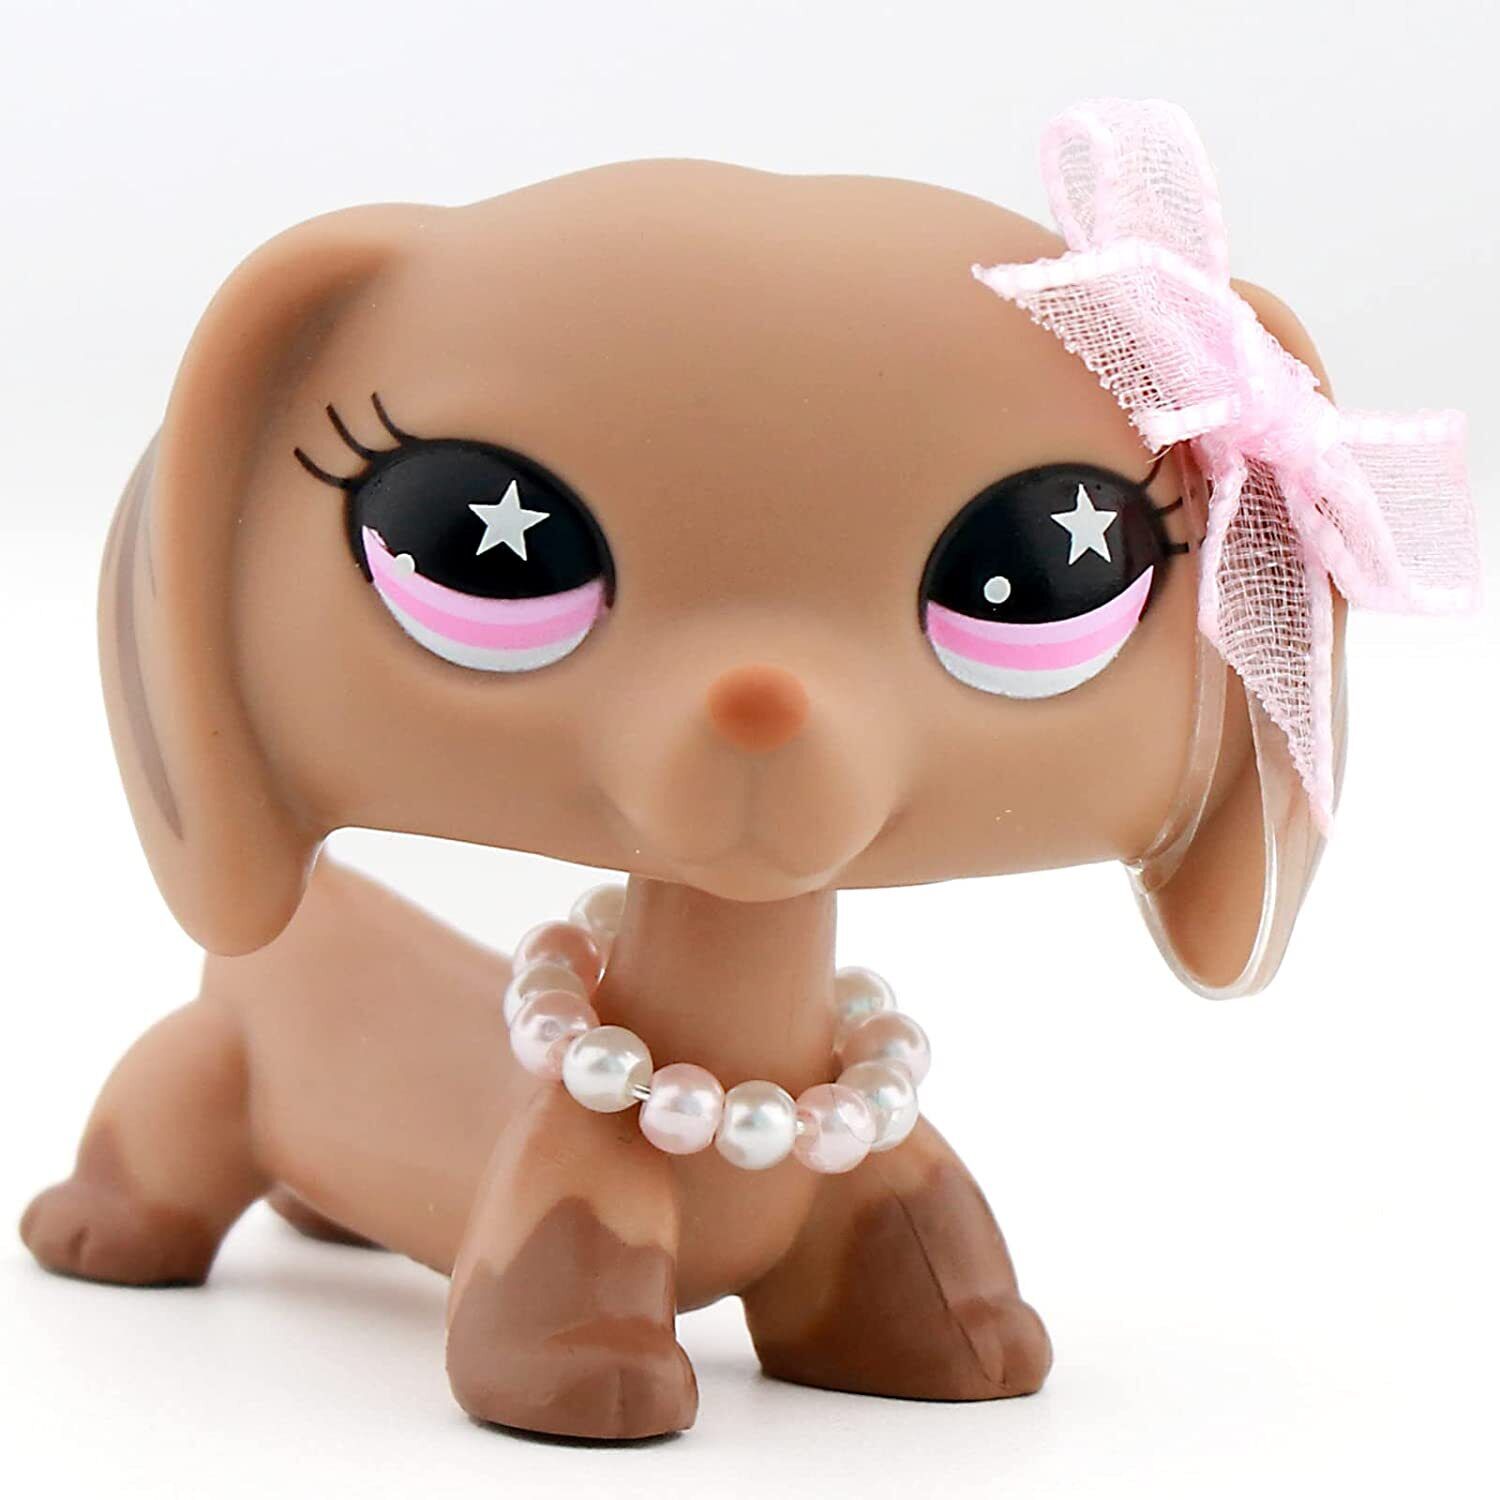 Littlest Pet Shop LPS Dachshund #932 with lps Accessories Necklace Bowknot Rare NLPS